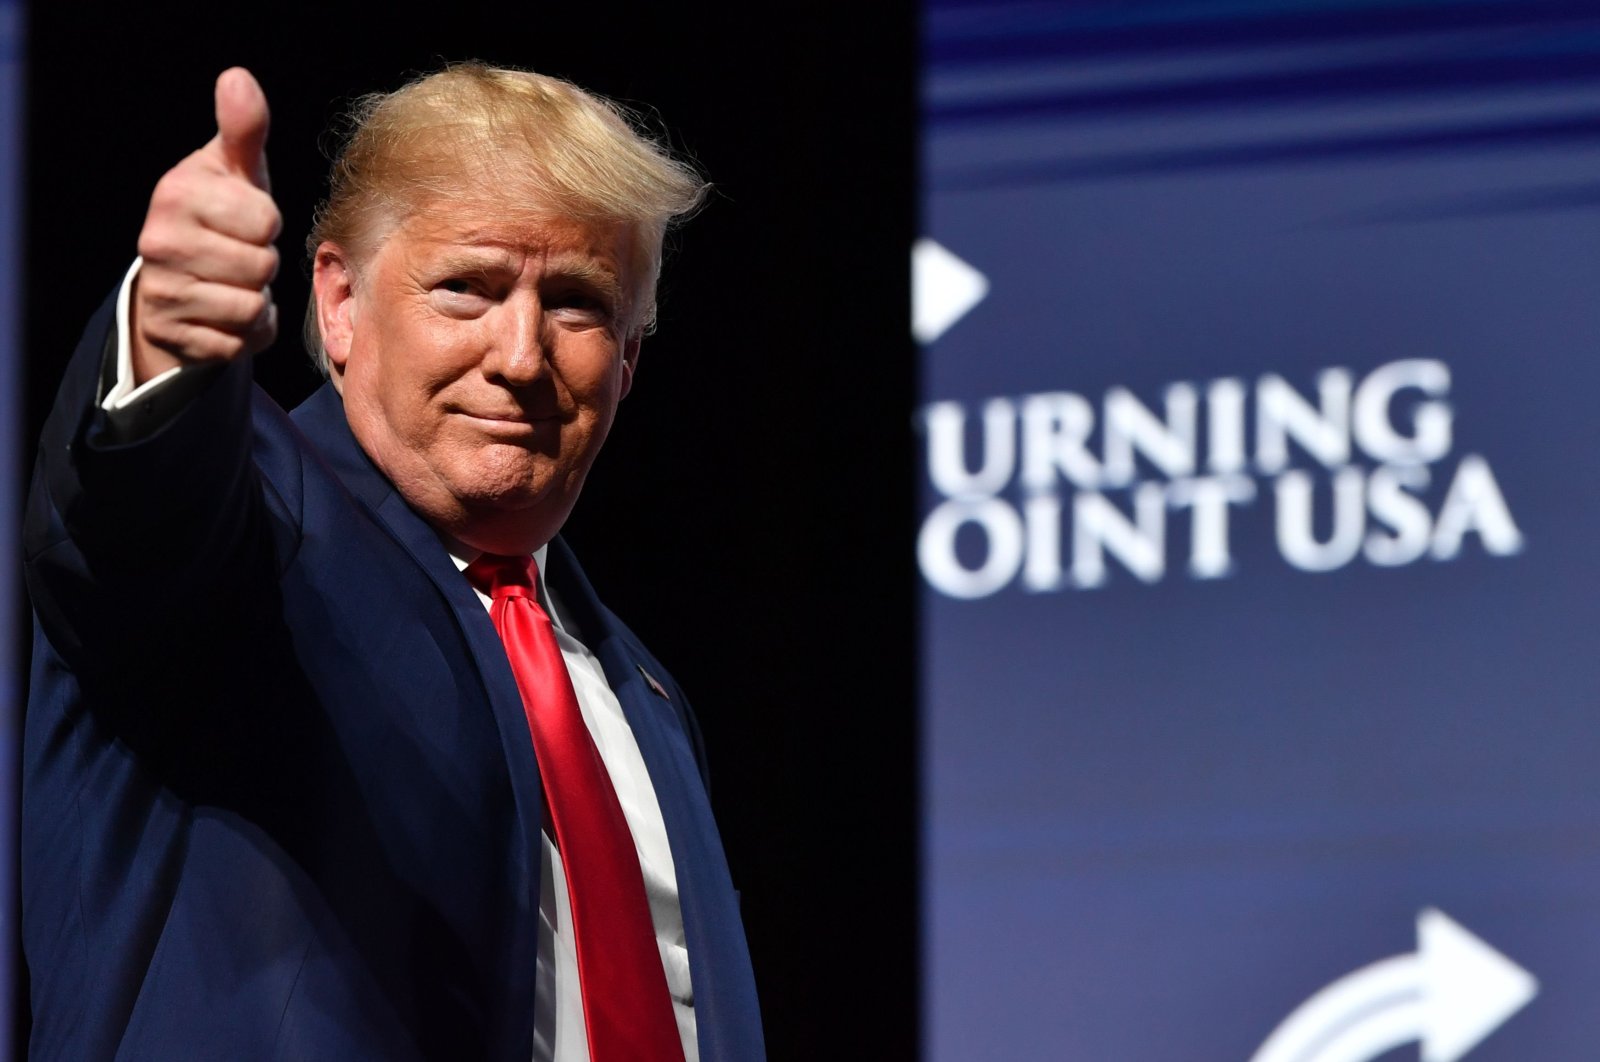 U.S. President Donald Trump gestures during the Turning Point USA Student Action Summit at the Palm Beach County Convention Center in West Palm Beach, Florida, U.S., Dec. 21, 2019. (AFP Photo)